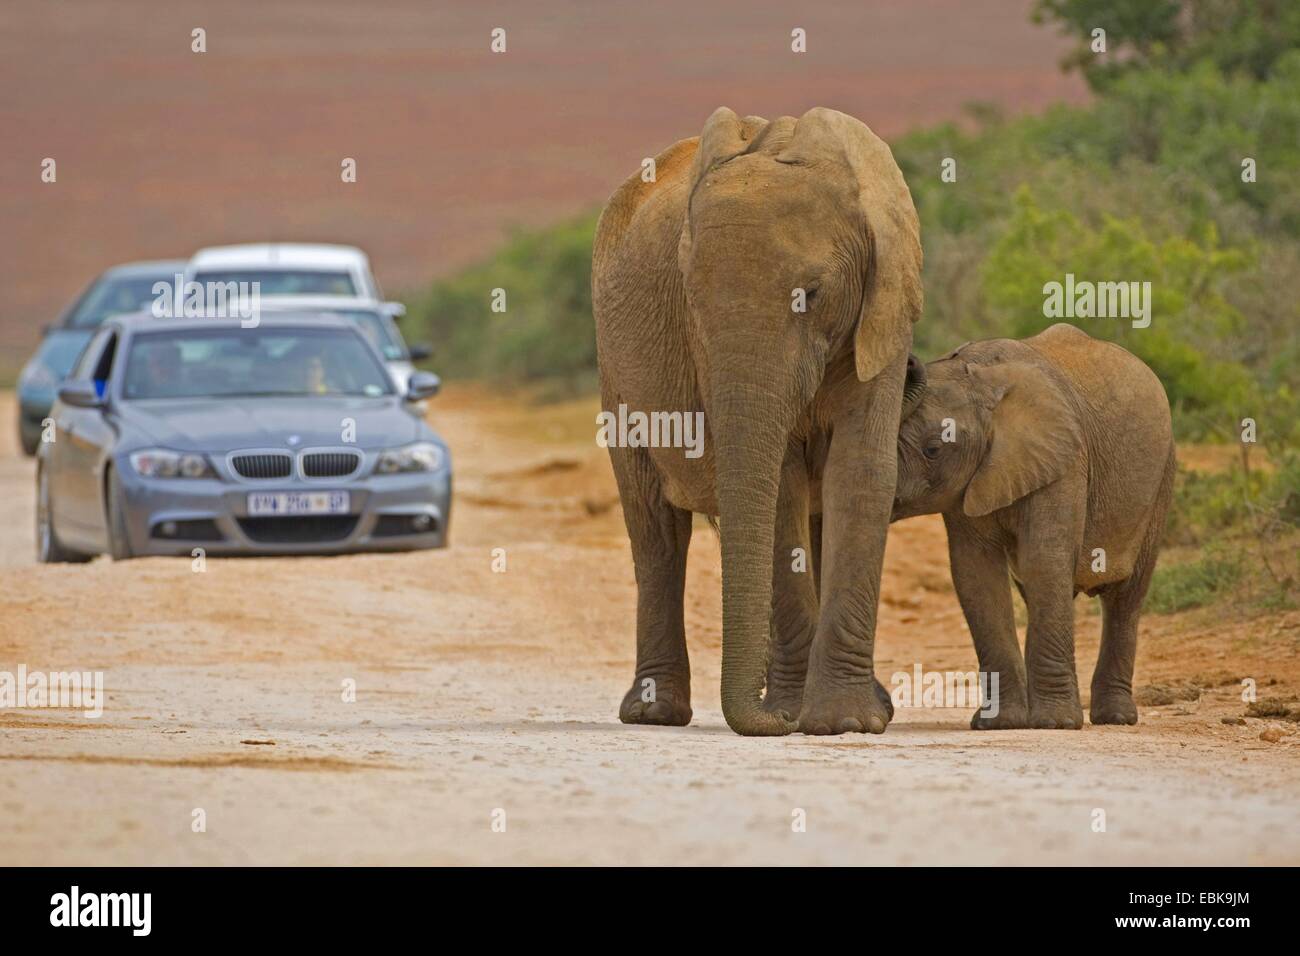 African elephant (Loxodonta africana), calf suckling on gravel road, South Africa, Eastern Cape, Addo Elephant National Park Stock Photo